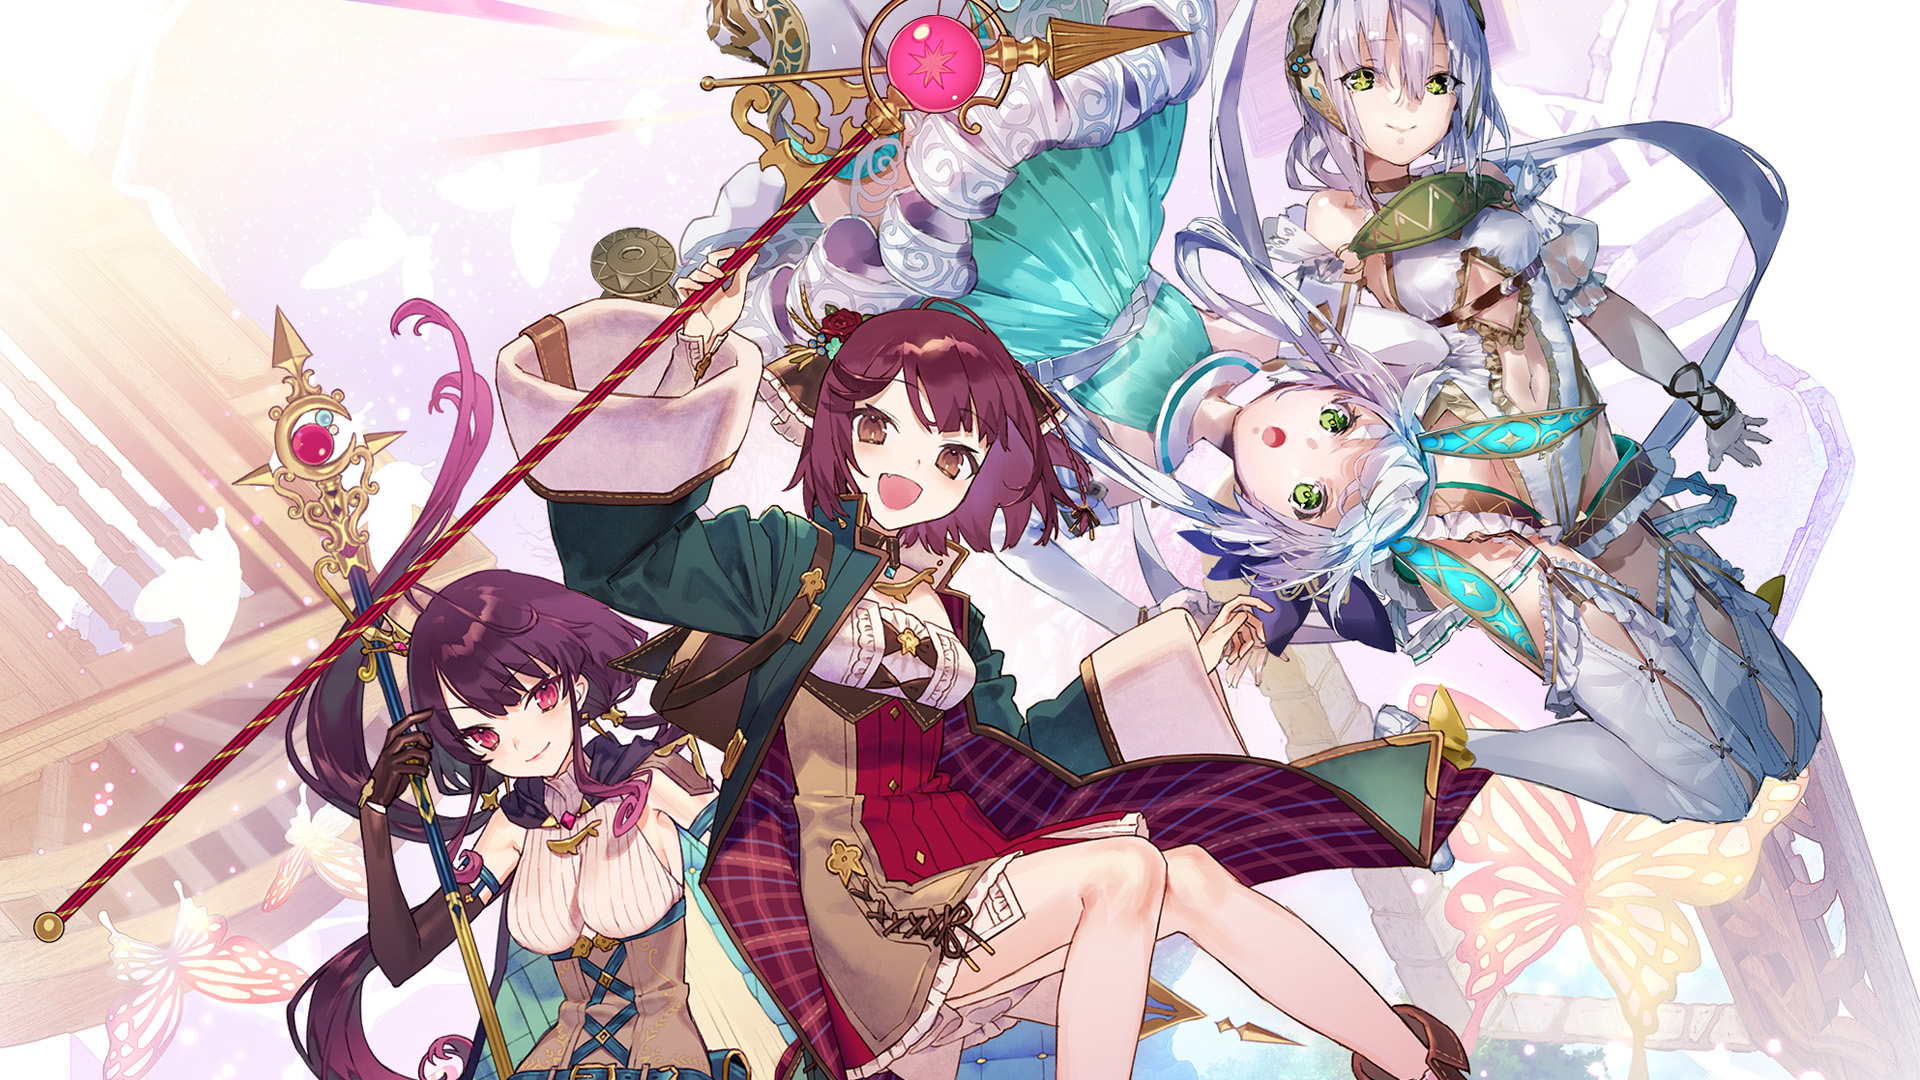 Atelier Sophie 2: The Alchemist of the Mysterious Dawn Announced for PC, Switch, and PS4